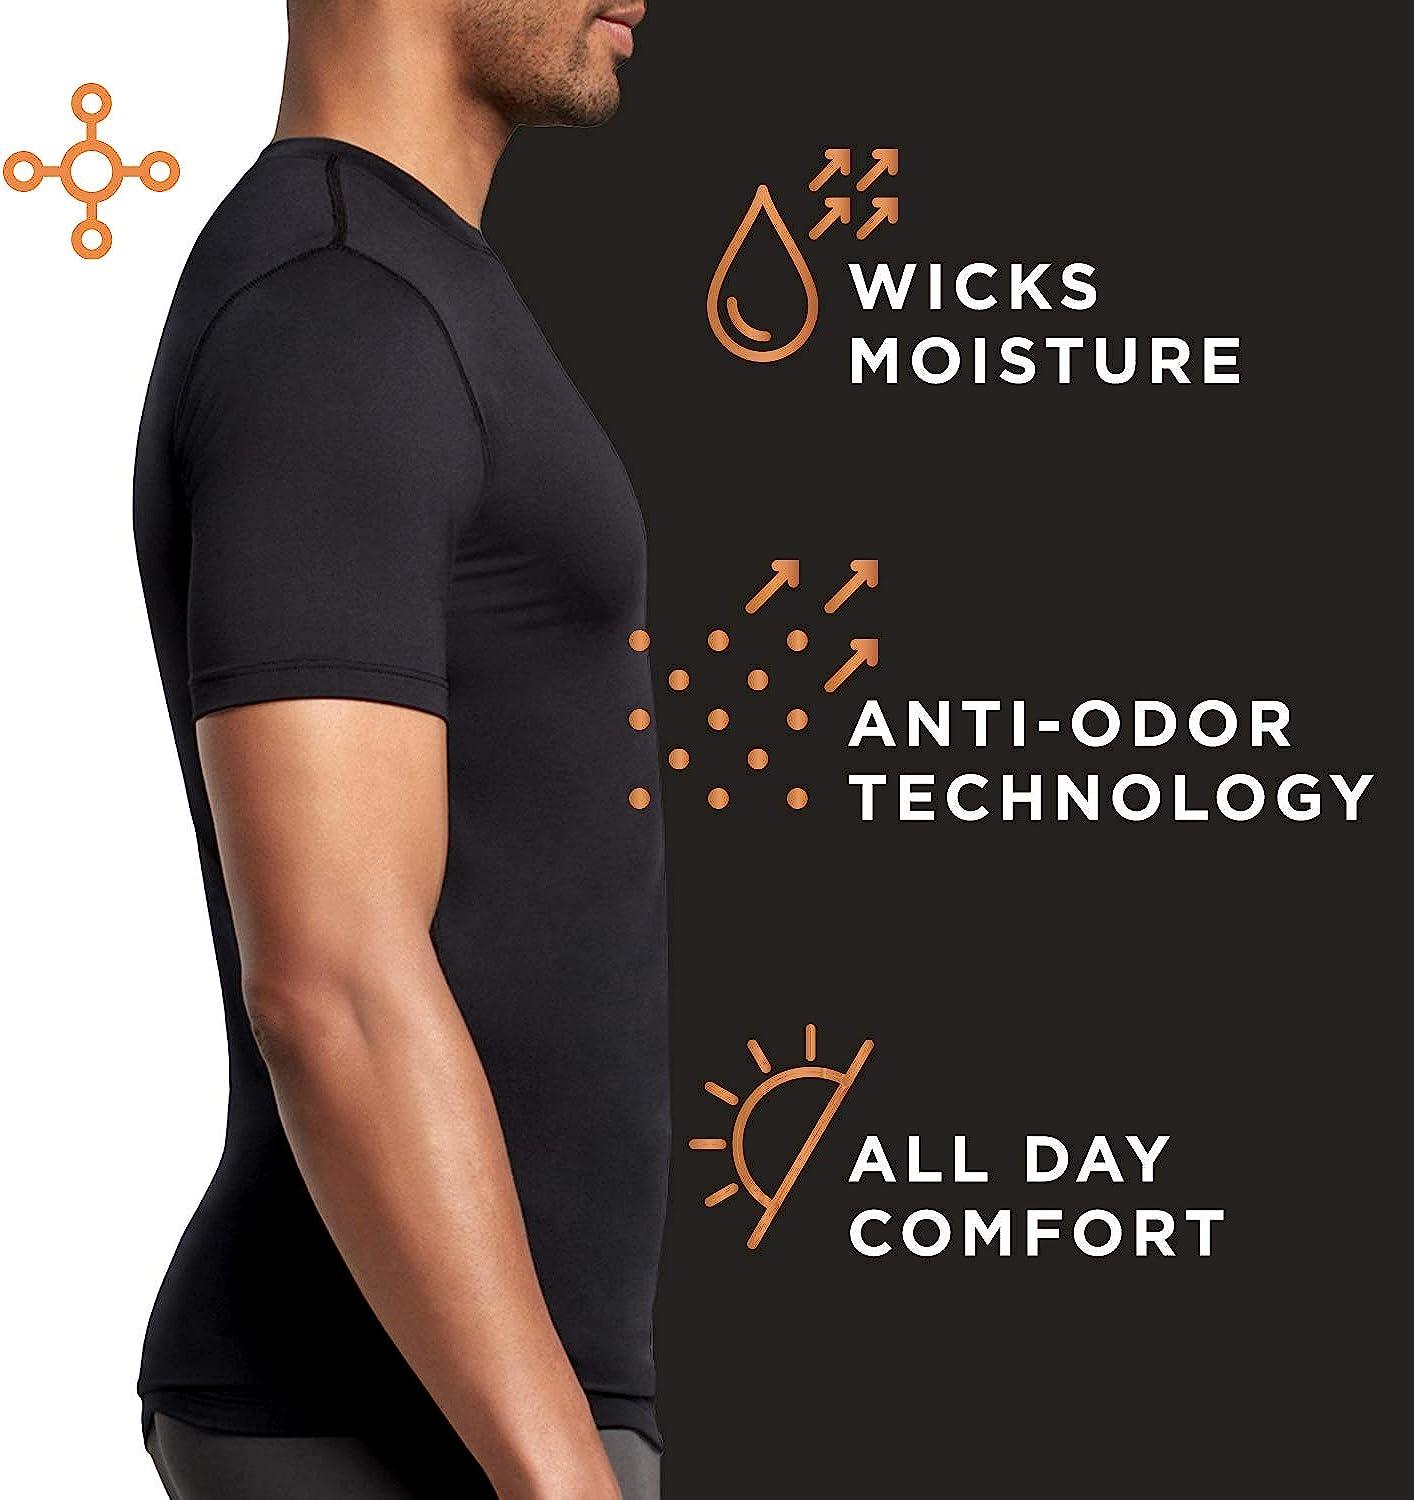 Tommie Copper Short Sleeve Mens Compression Shirt, Full Back Support Shirt,  Shoulder & Posture : : Clothing, Shoes & Accessories